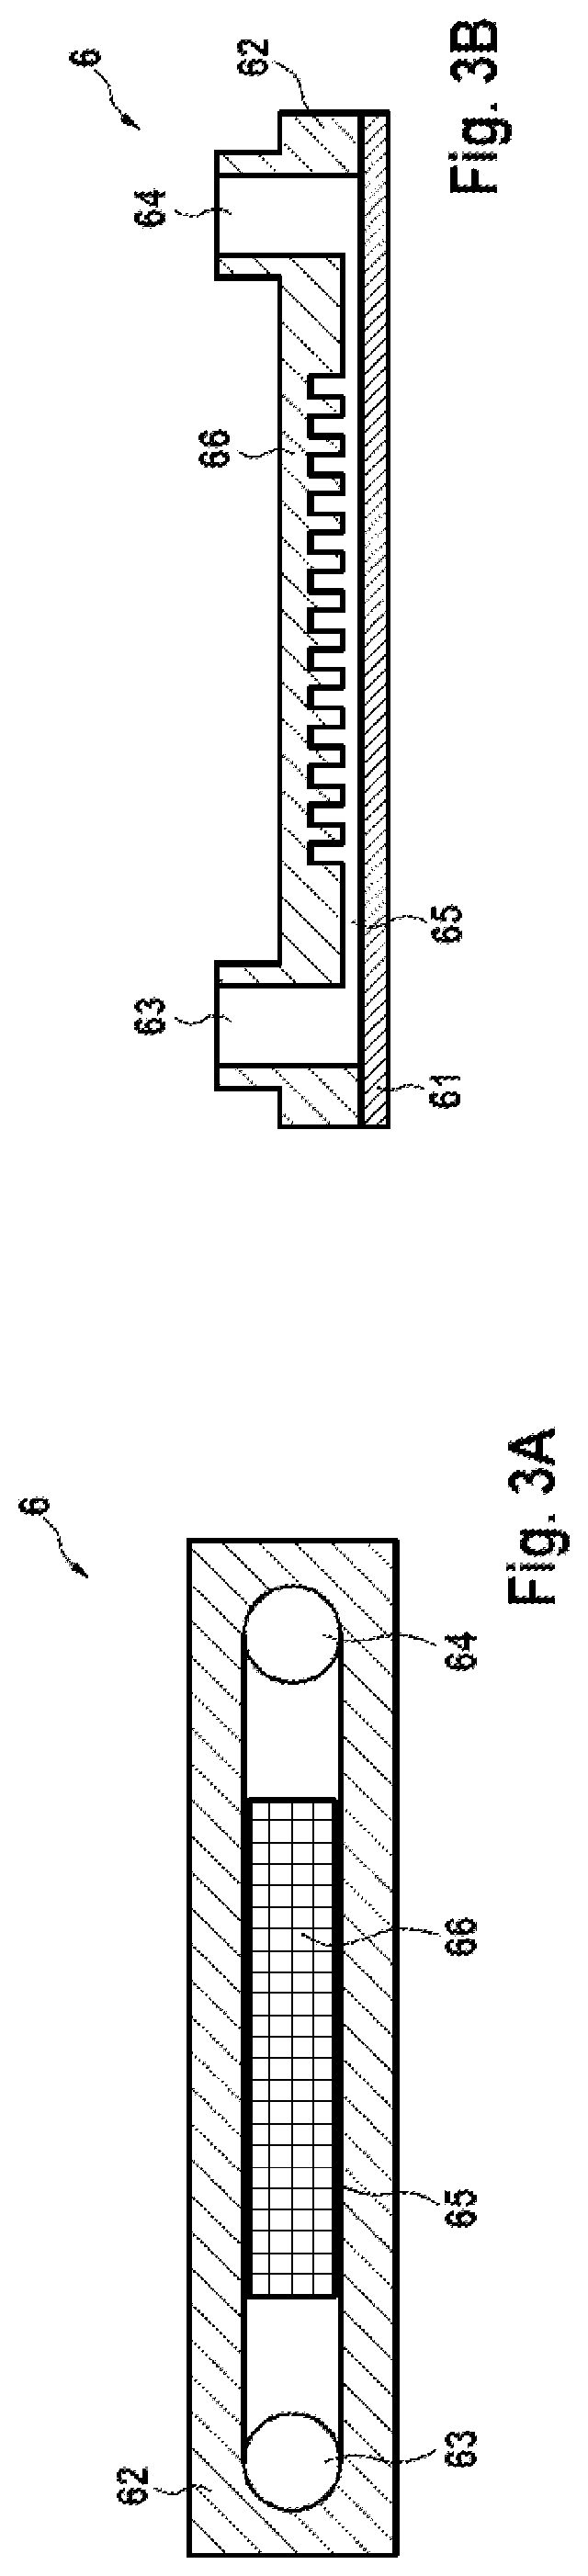 Microfluidic system for digital polymerase chain reaction of a biological sample, and respective method